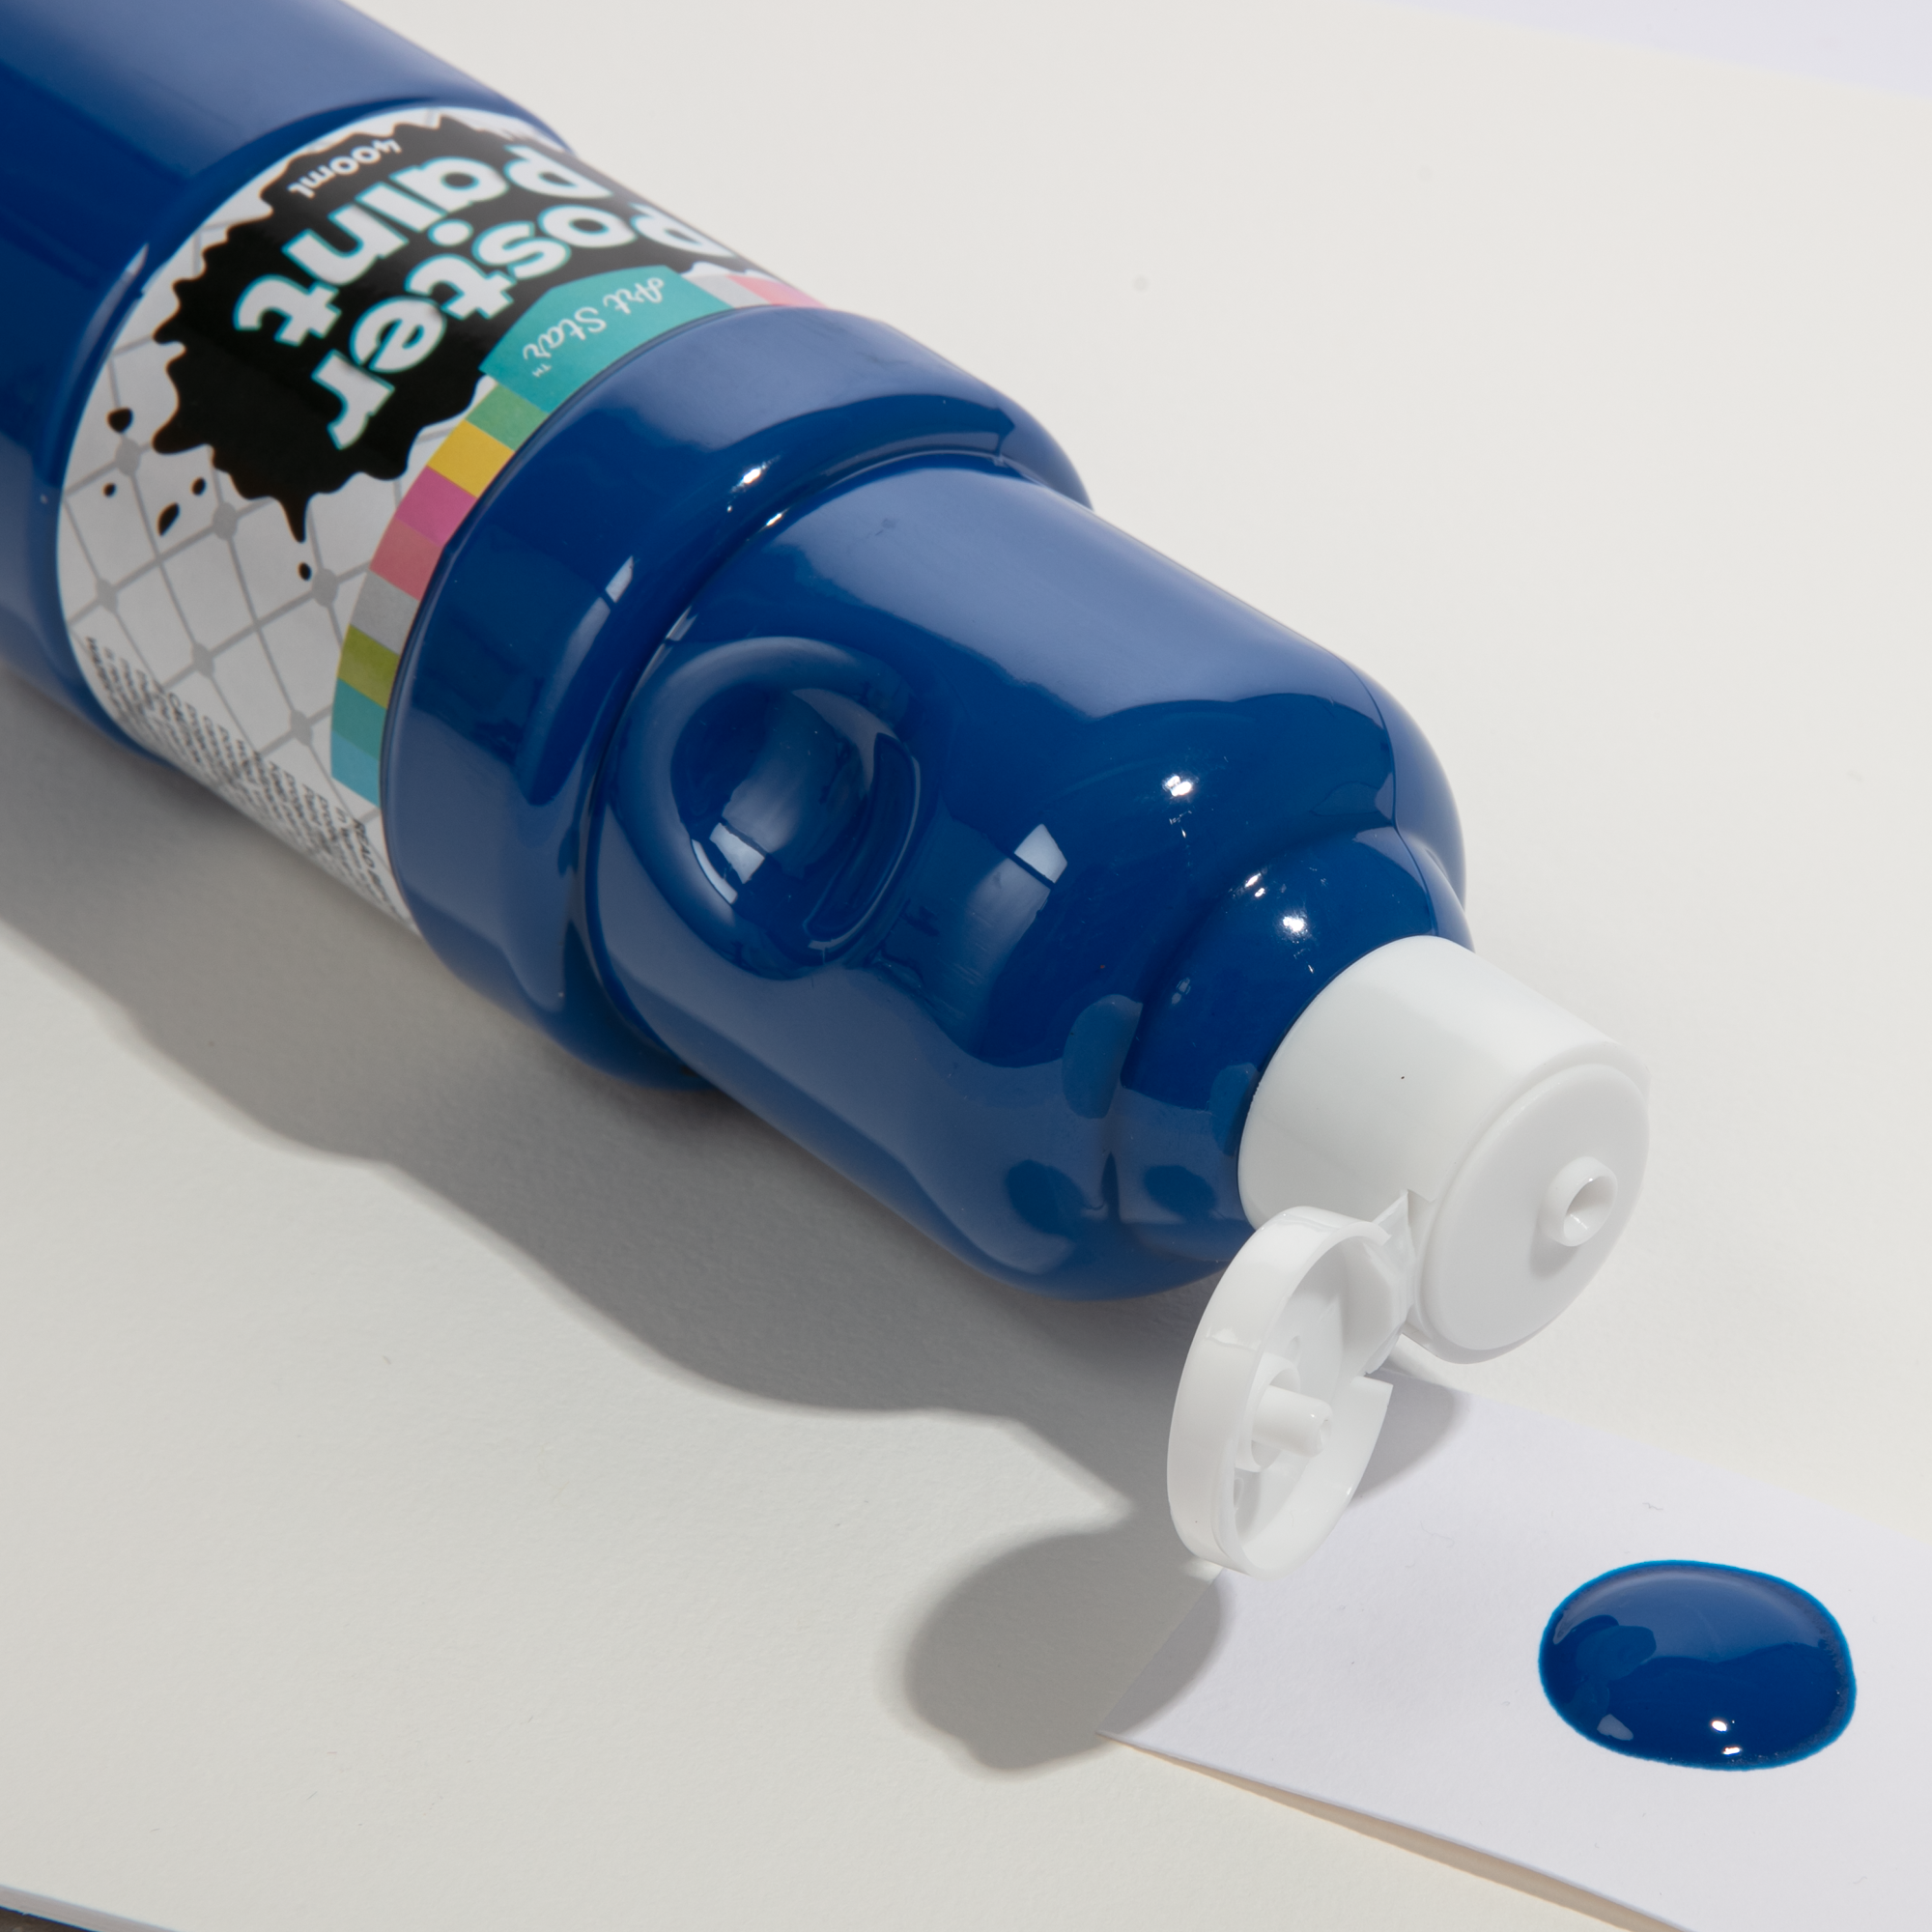 Have a look through our Art Star Poster Paint Blue 400ml FPL Art